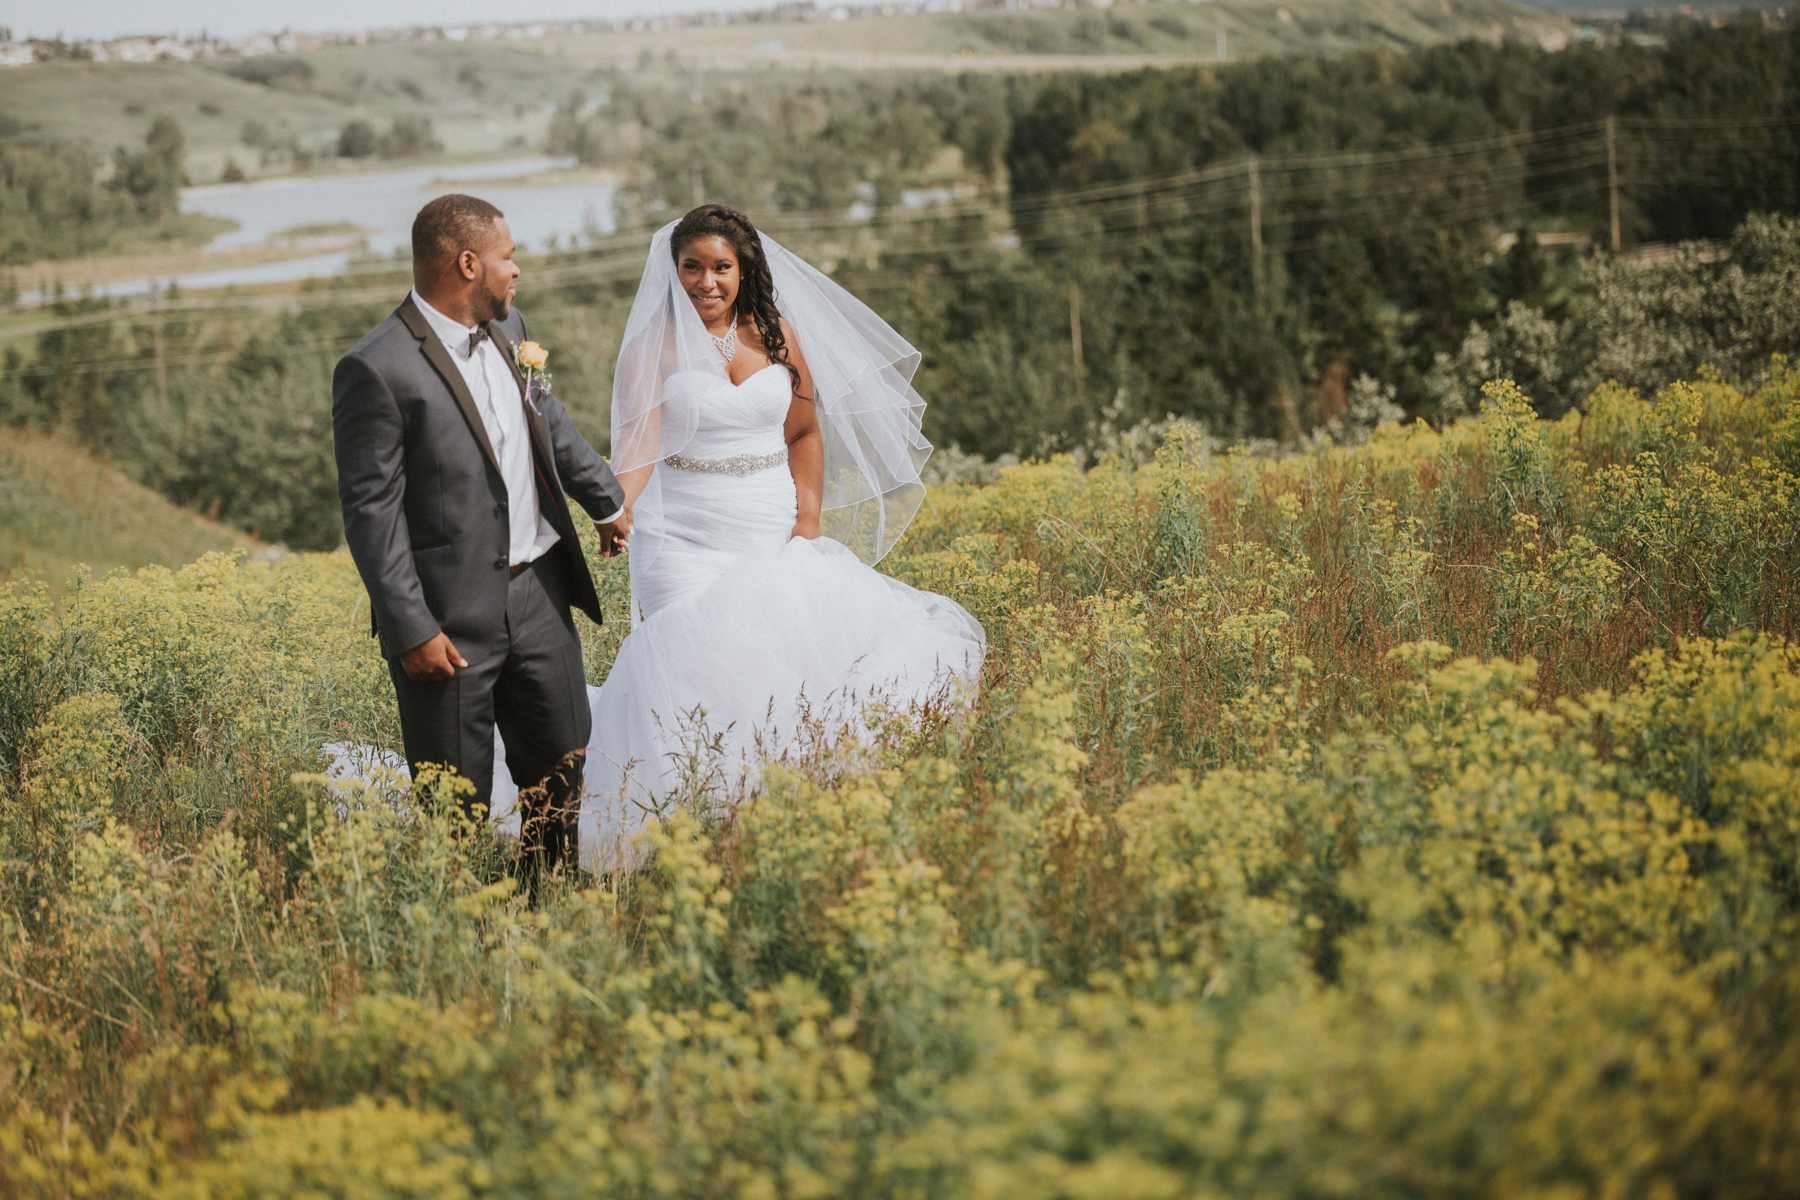 Calgary affordable wedding photography at Meadow Muse pavilion elopement in Fish Creek Provincial Park, Alberta, Canada - Image 51